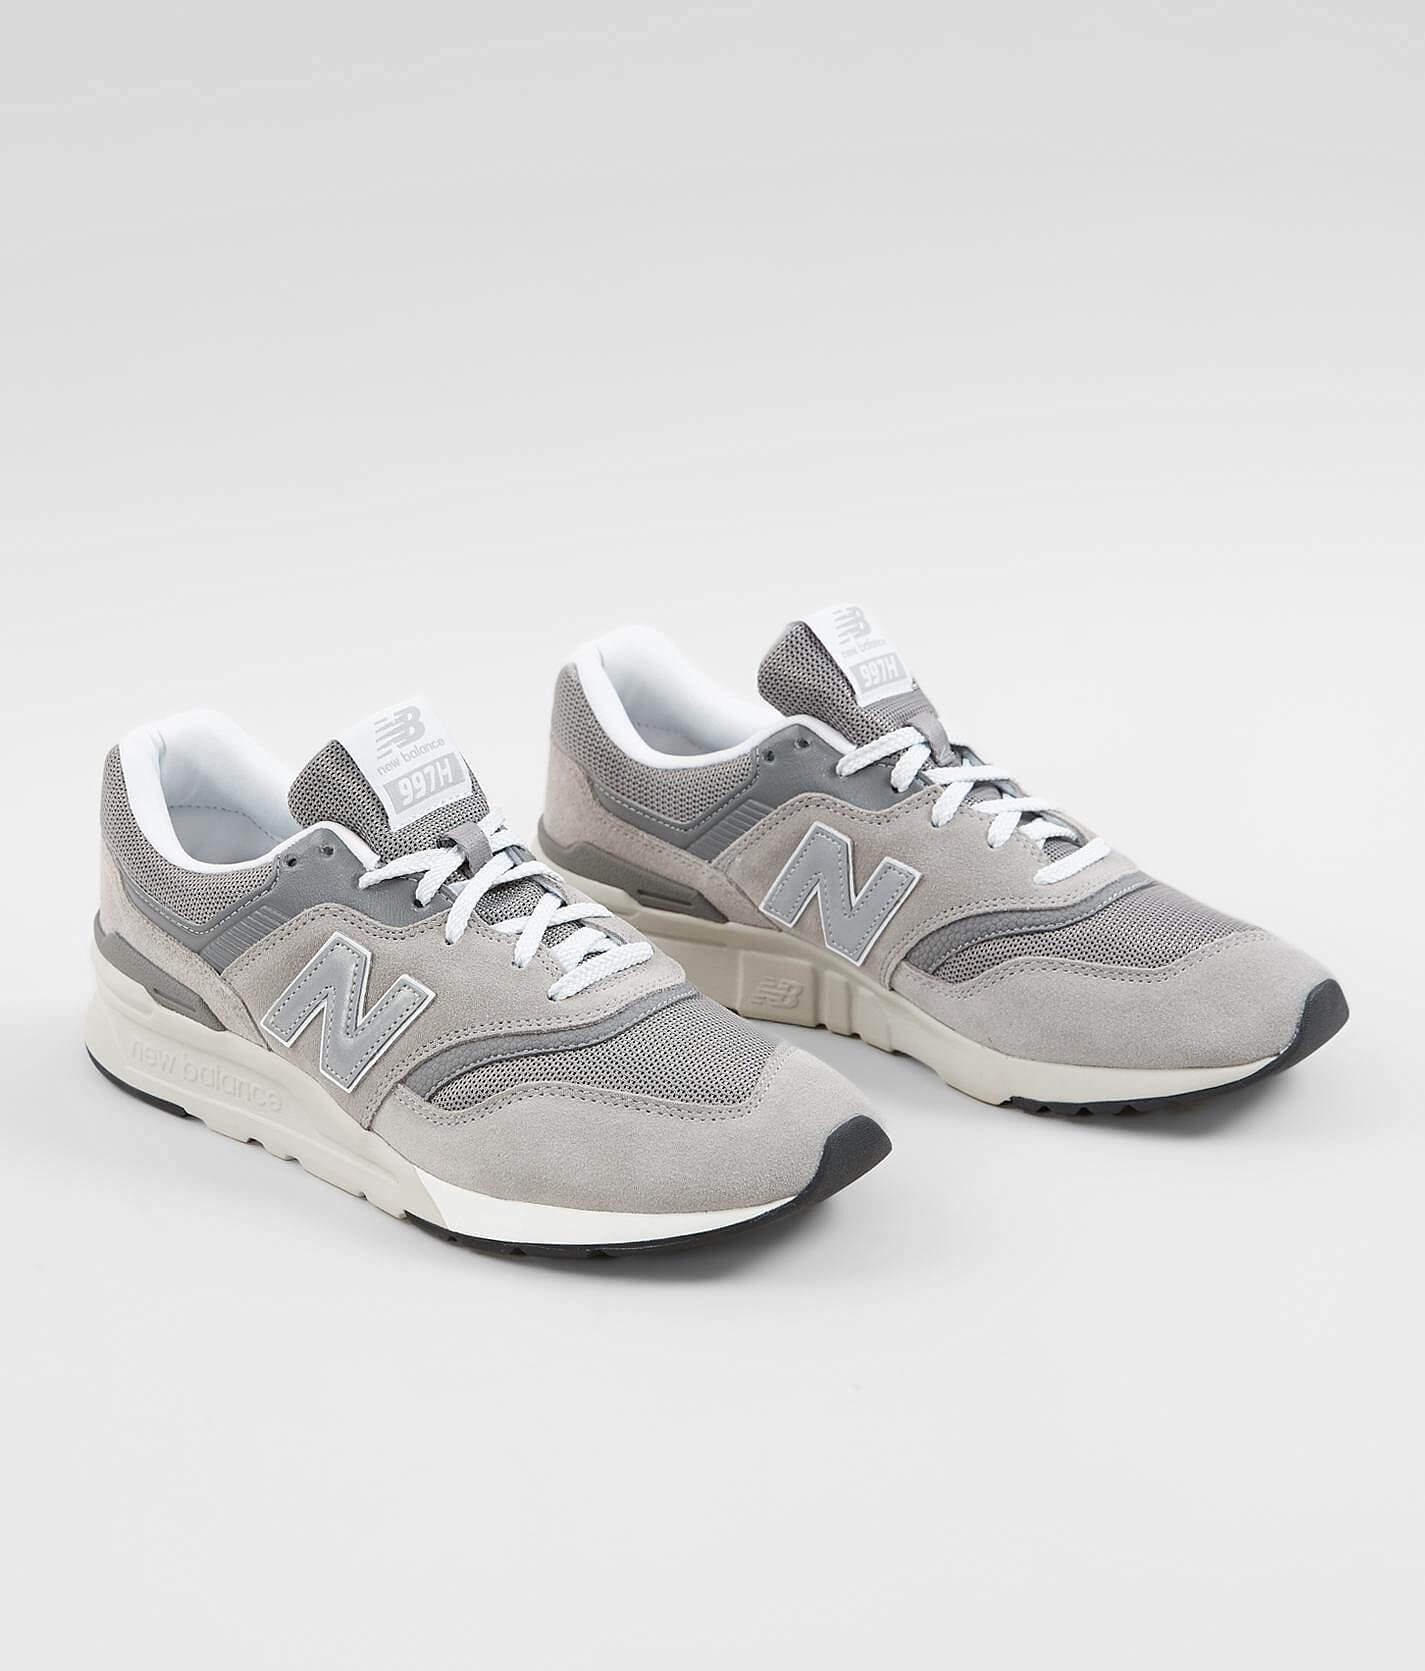 New Balance 977H Classic Suede Shoe - Men's Shoes in ...